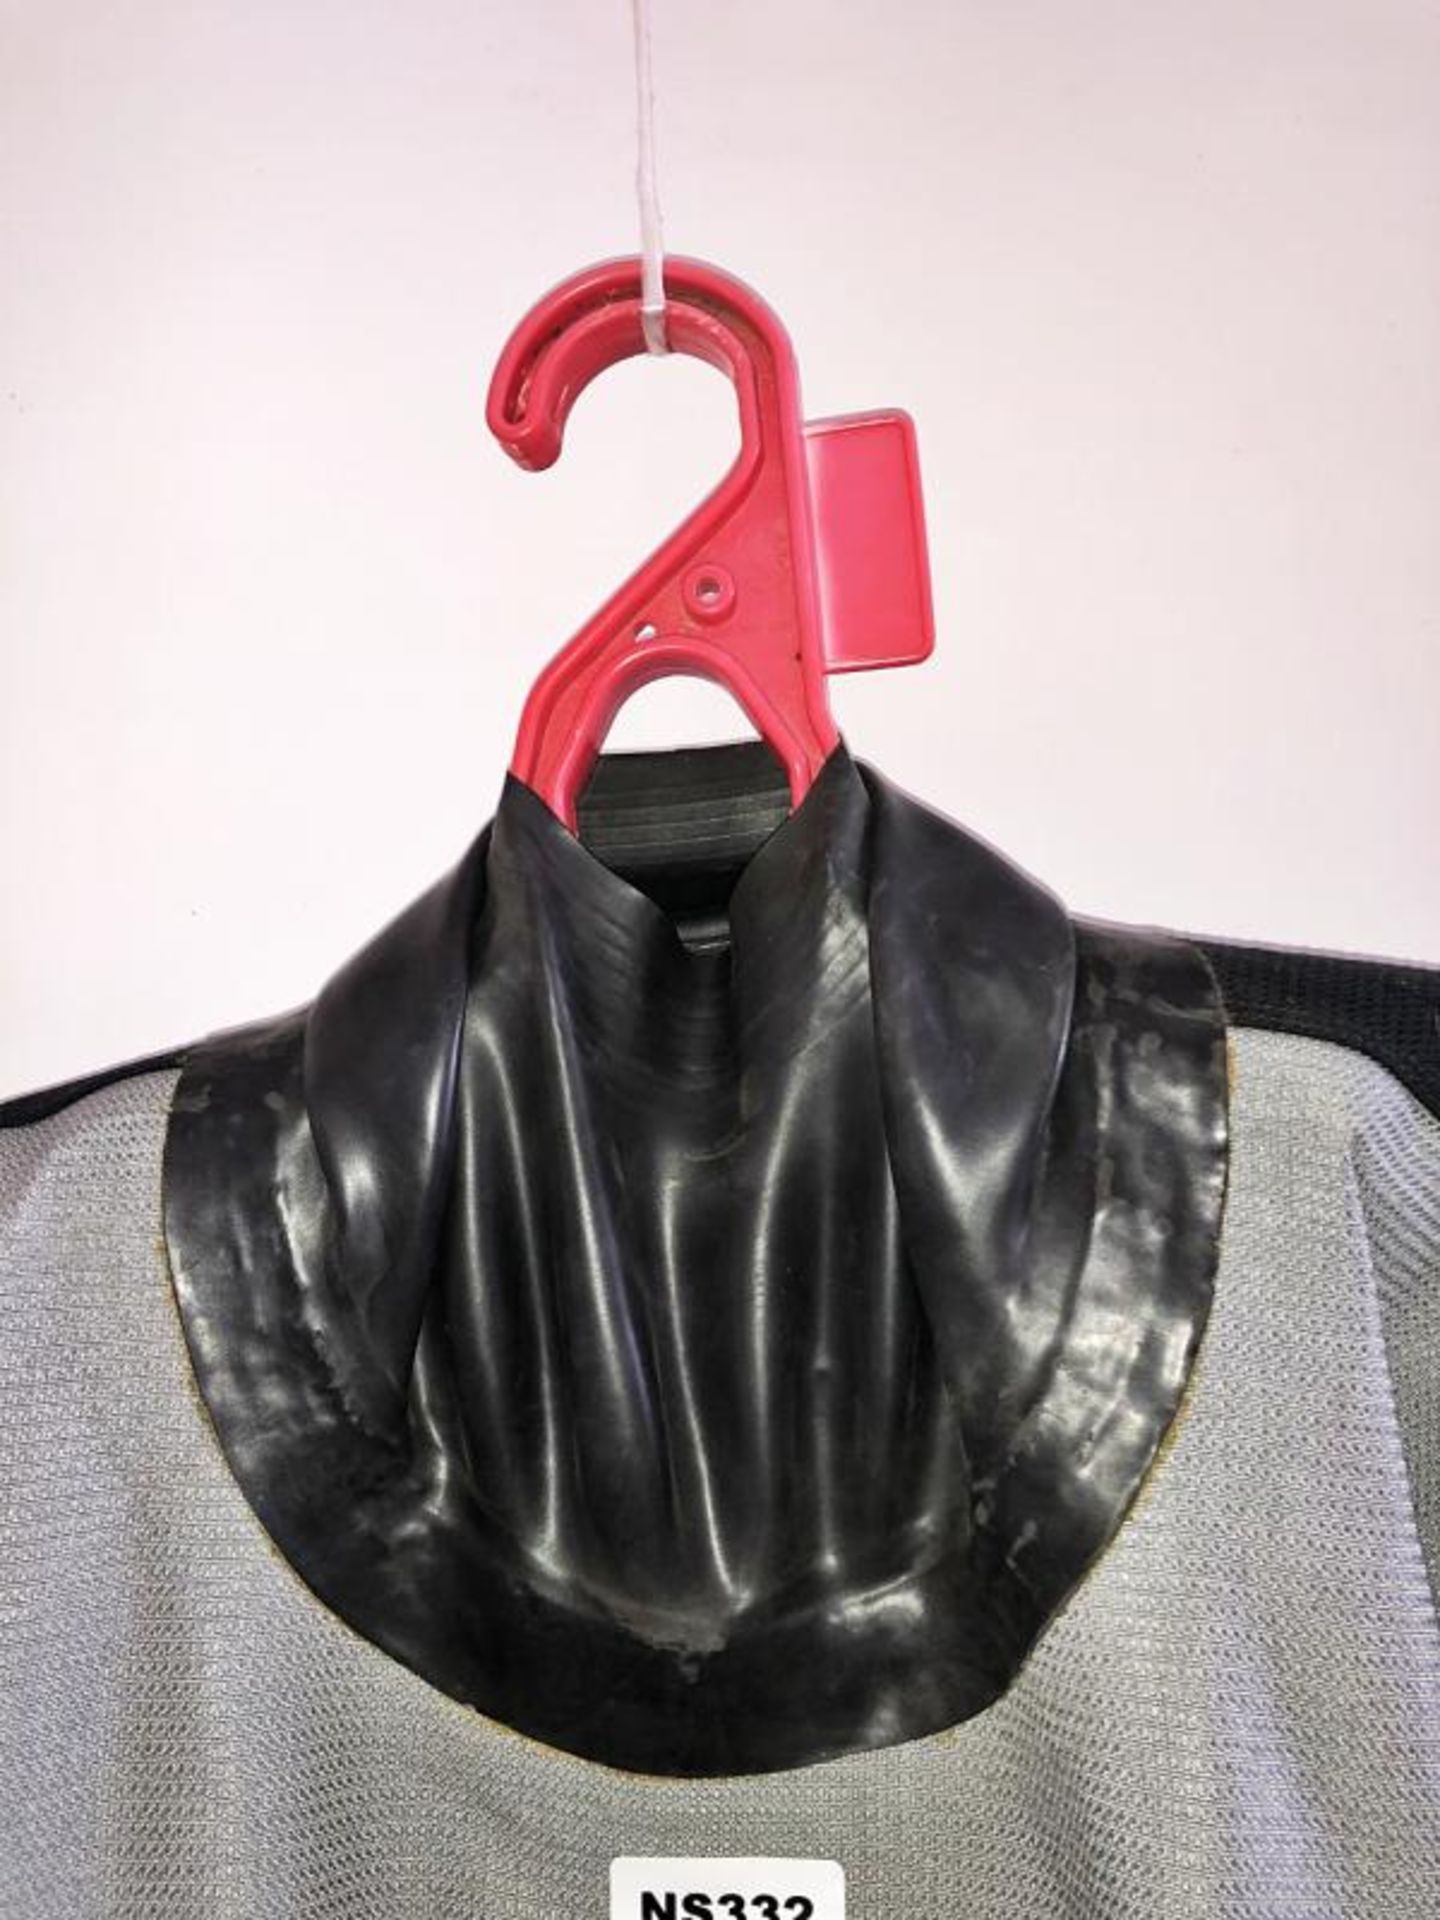 4 x Used Diving Drysuit's - Ref: NS332, NS333, NS343, NS344 - CL349 - Altrincham WA14 - Image 3 of 21